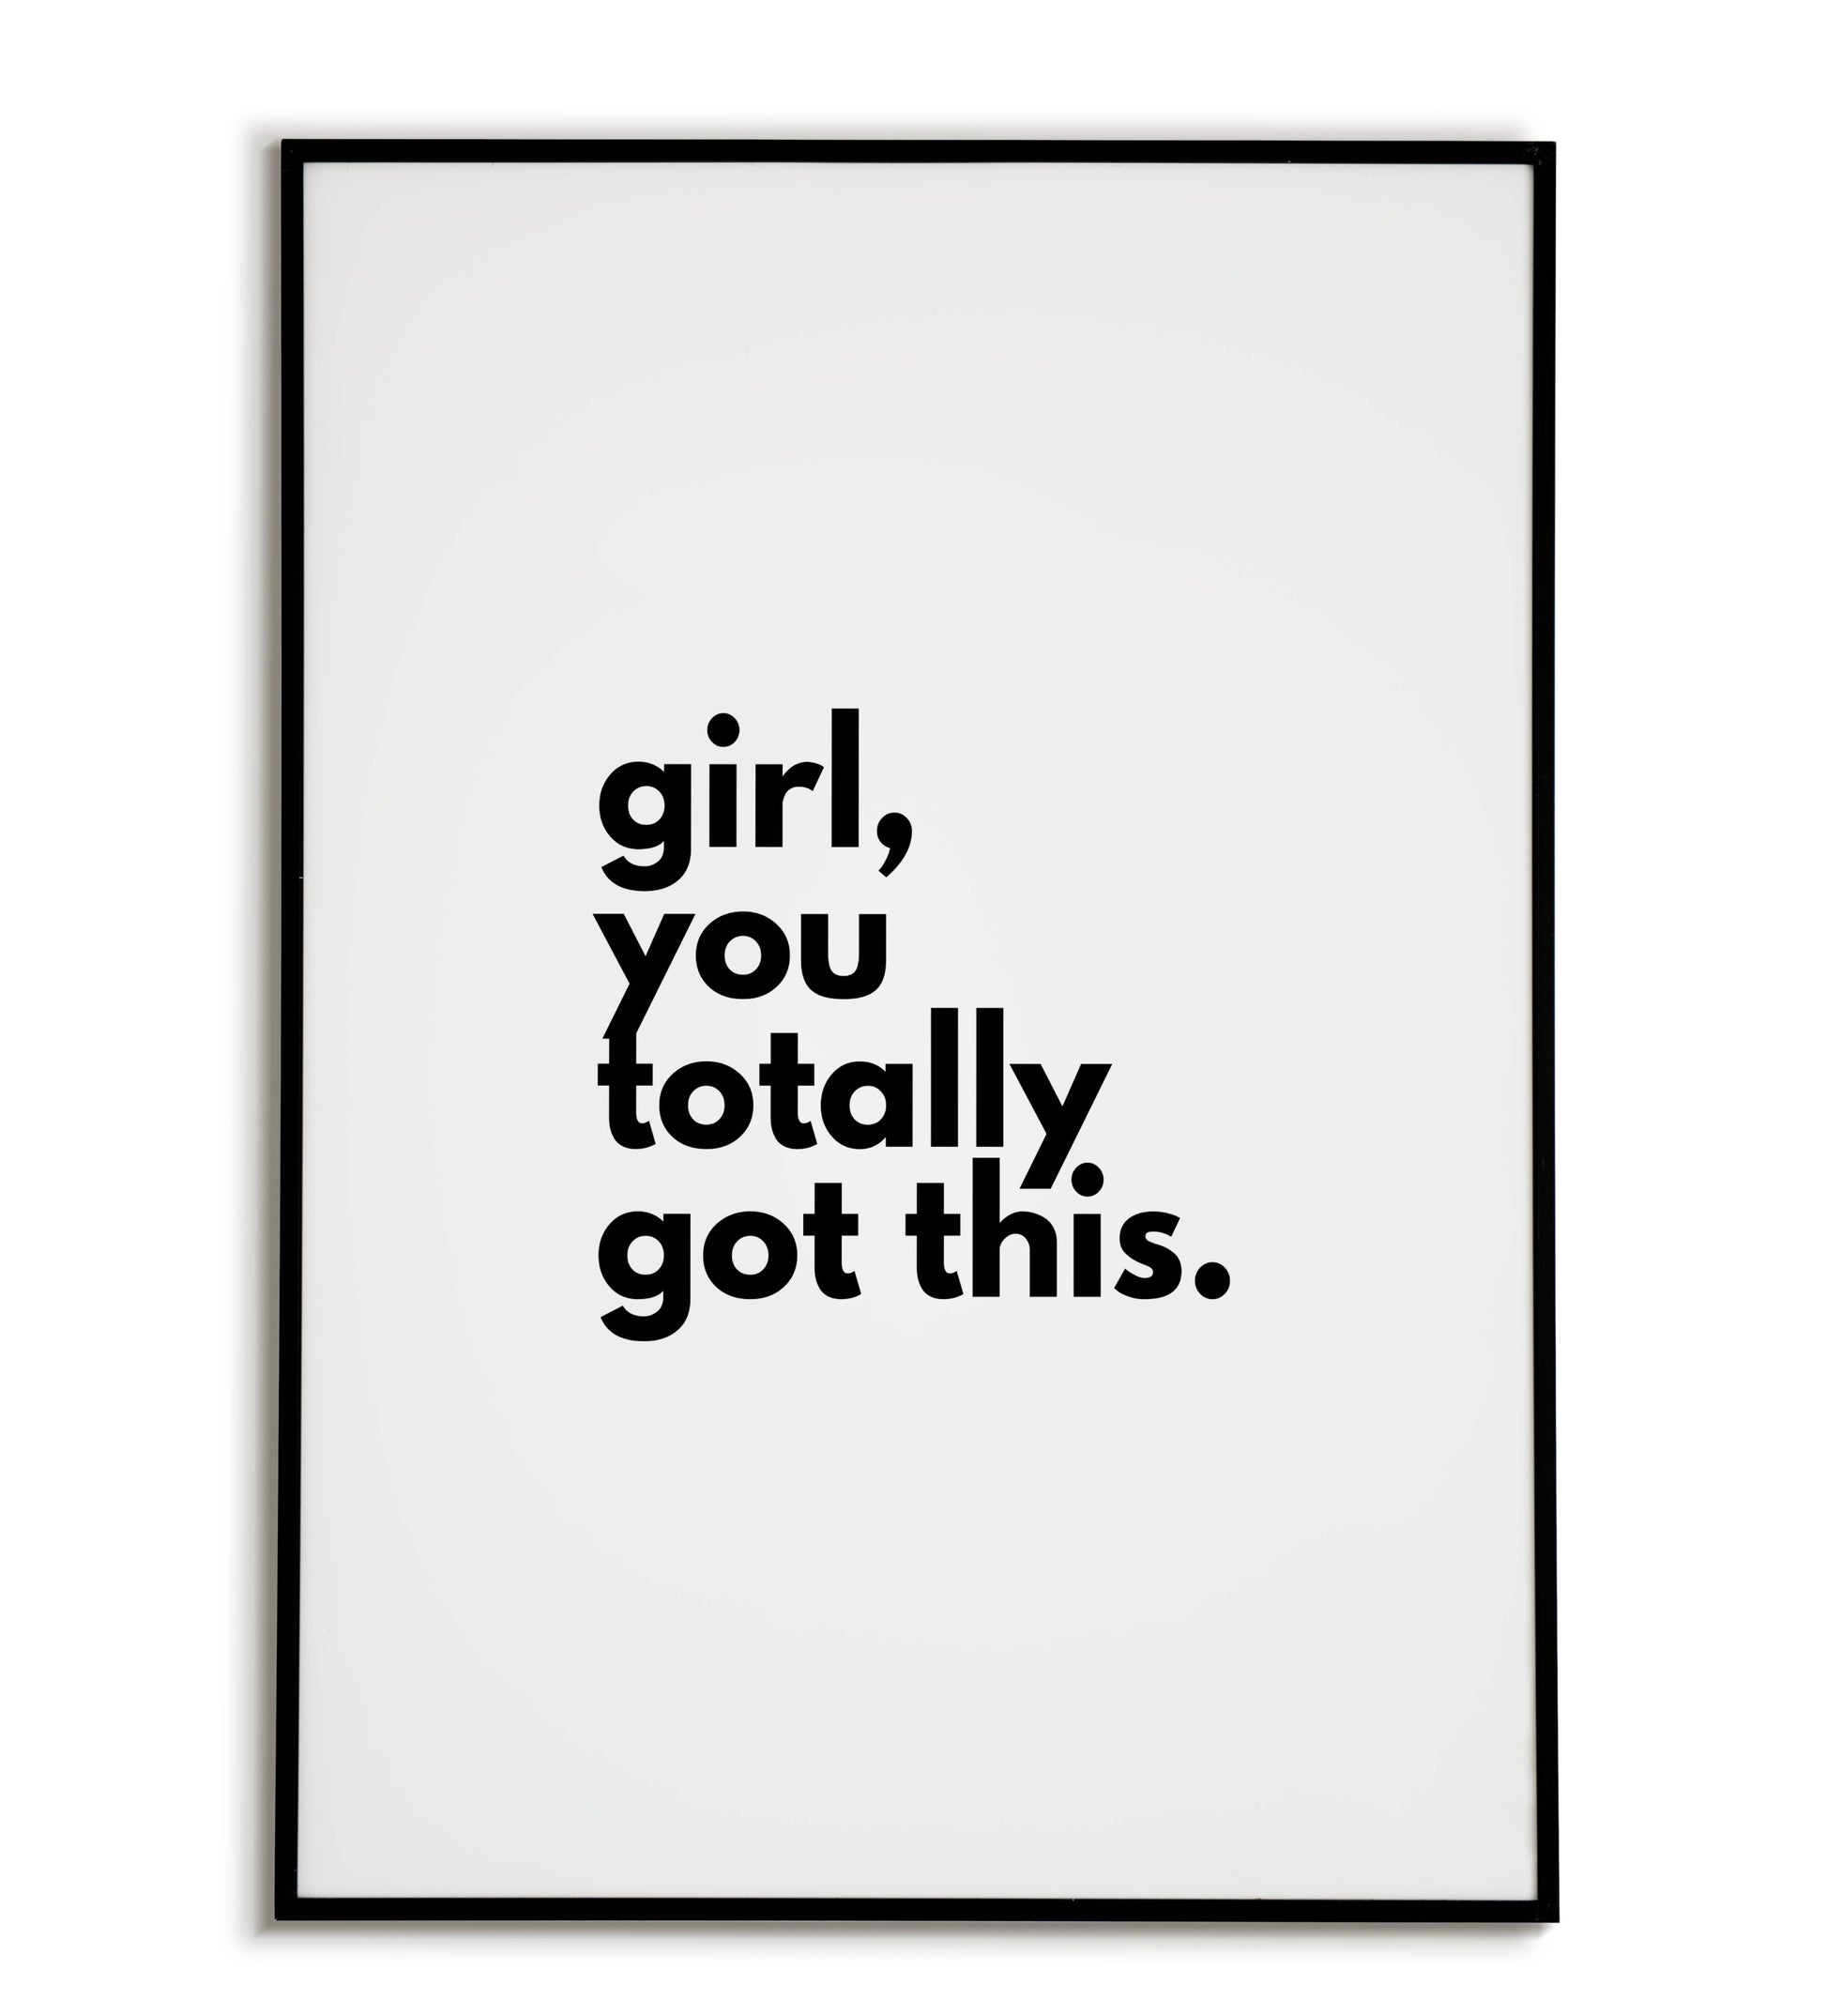 Girl, You Totally Got This - Inspirational quote empowering women to achieve their goals.